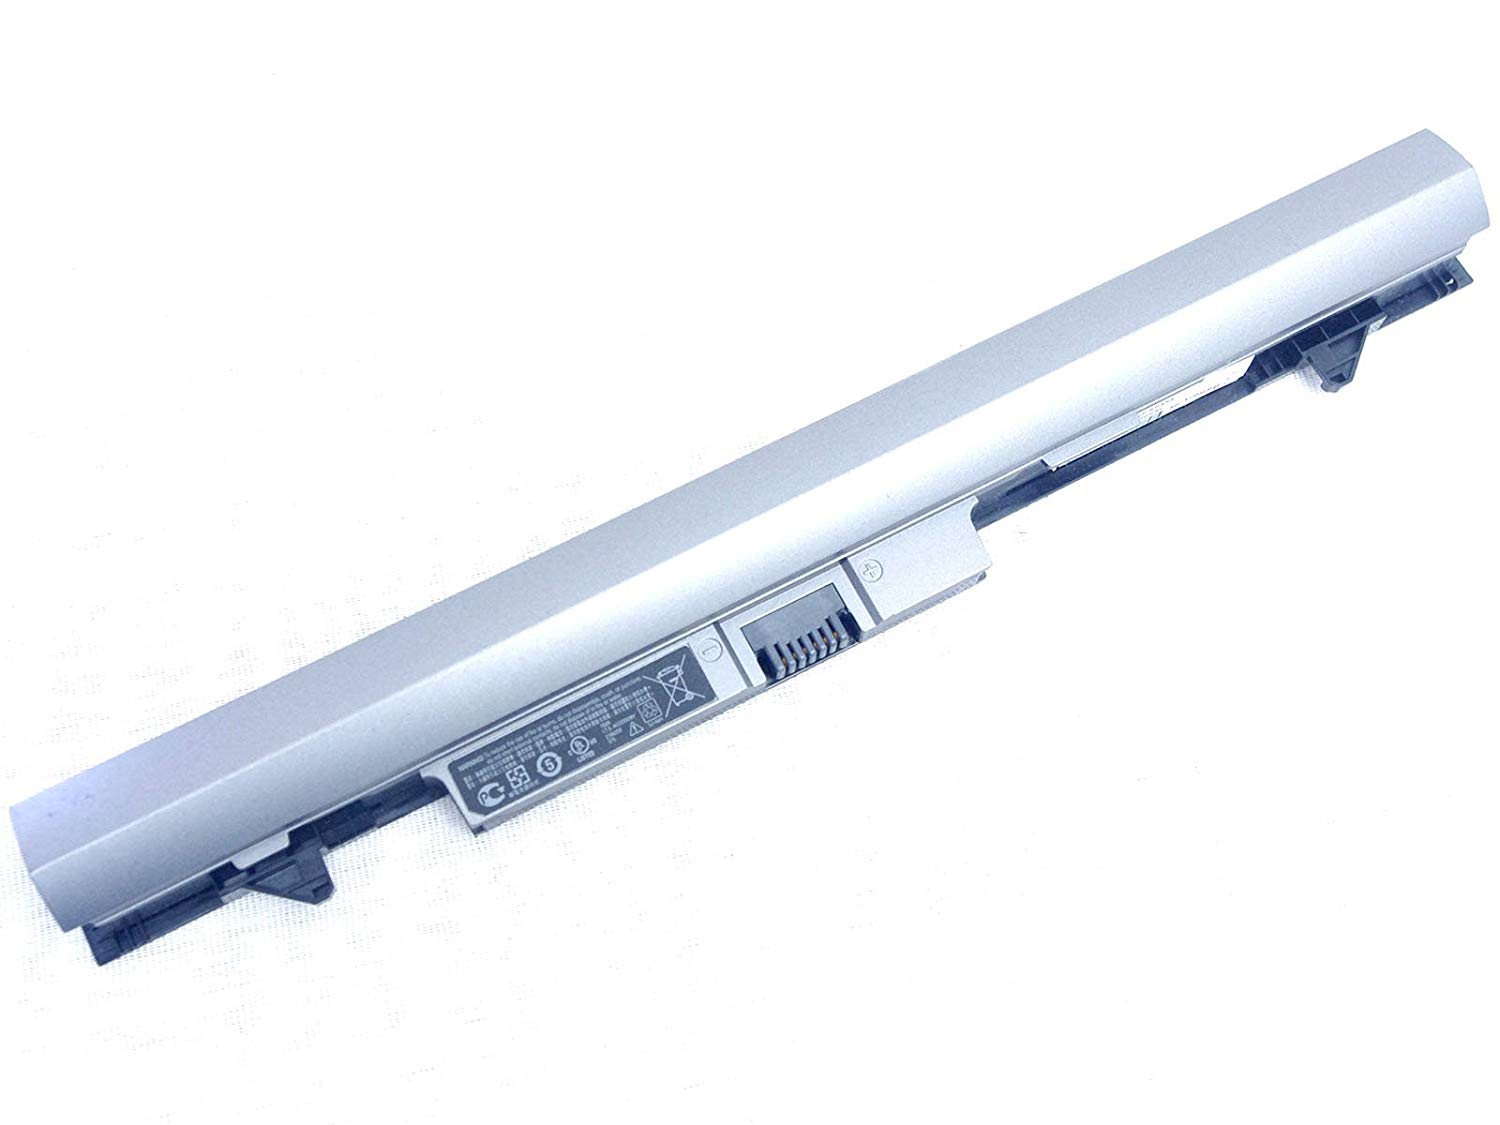 HP ORIGINAL 4 CELL 14.8V 33 WHR BATTERY FOR HP PROBOOK 430 SERIES (H6L28AA)